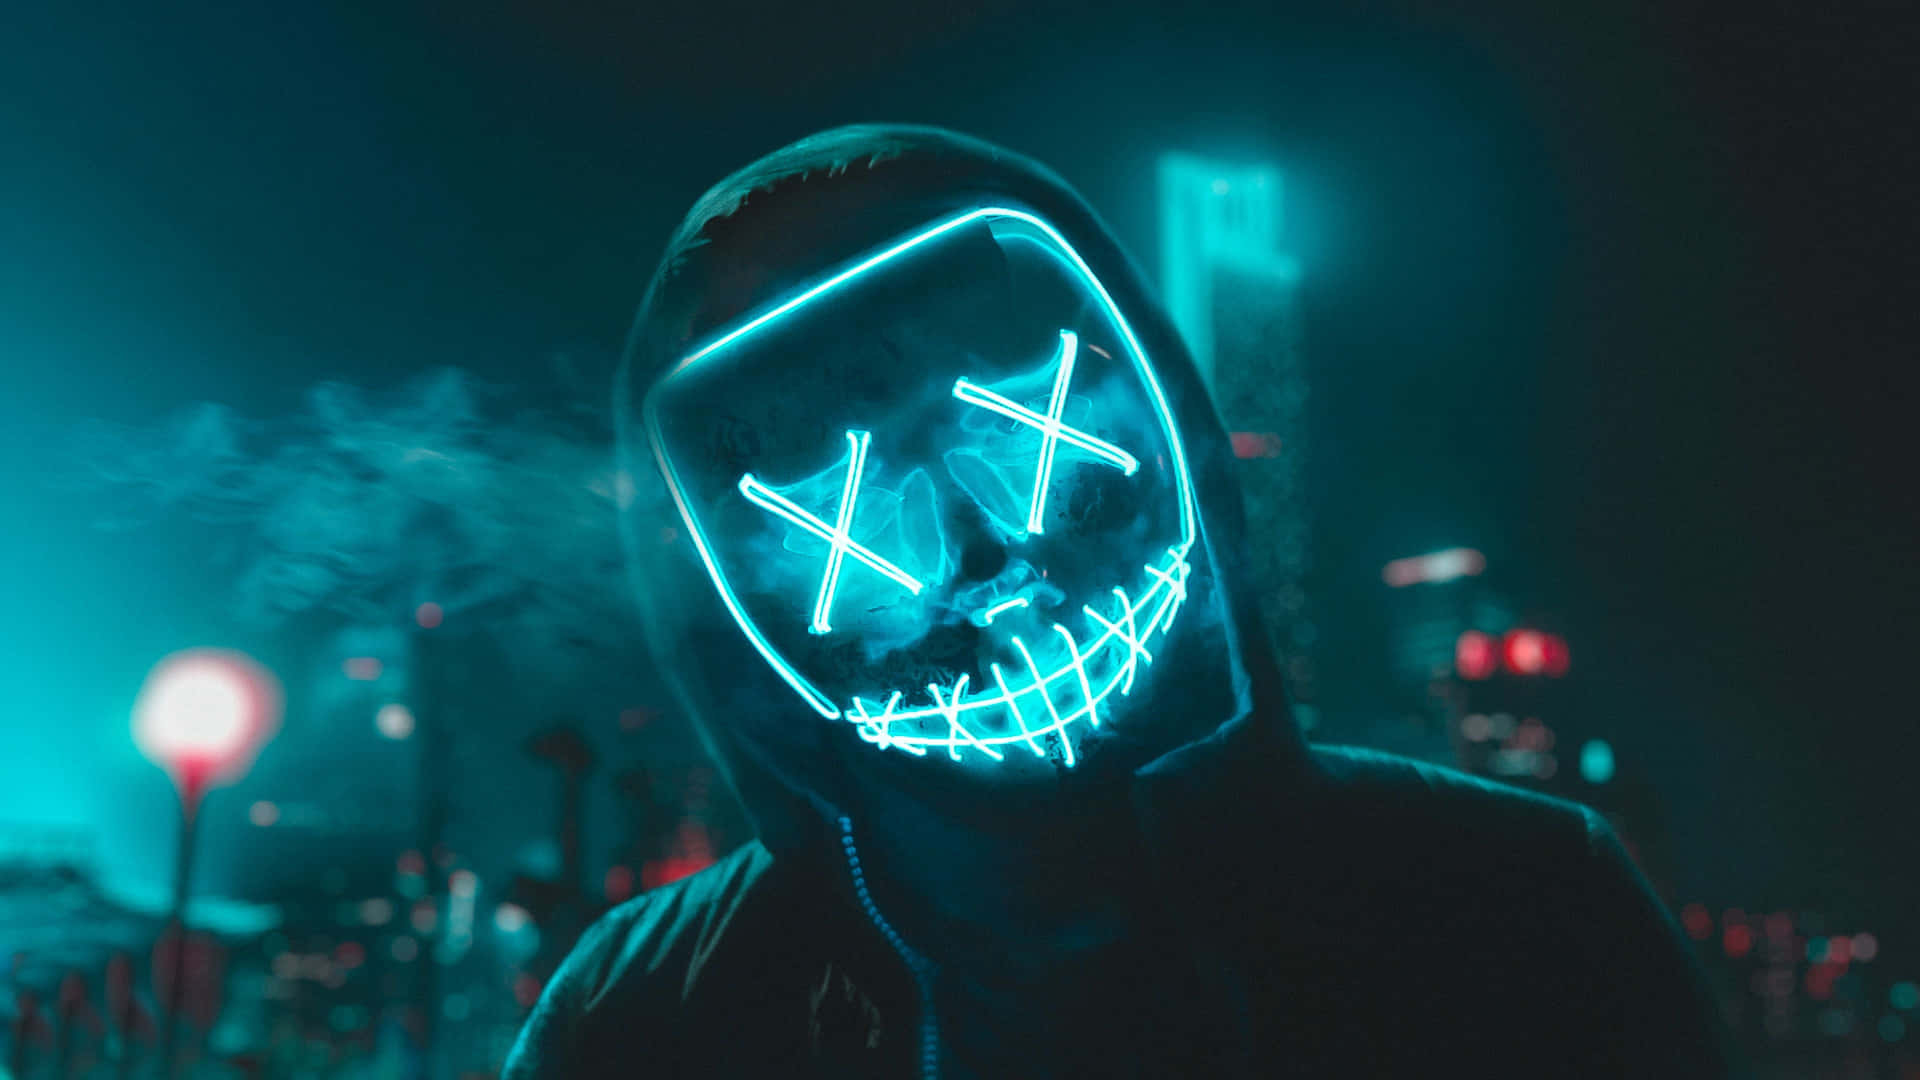 Blue Neon Smiling Mask In 4k Quality